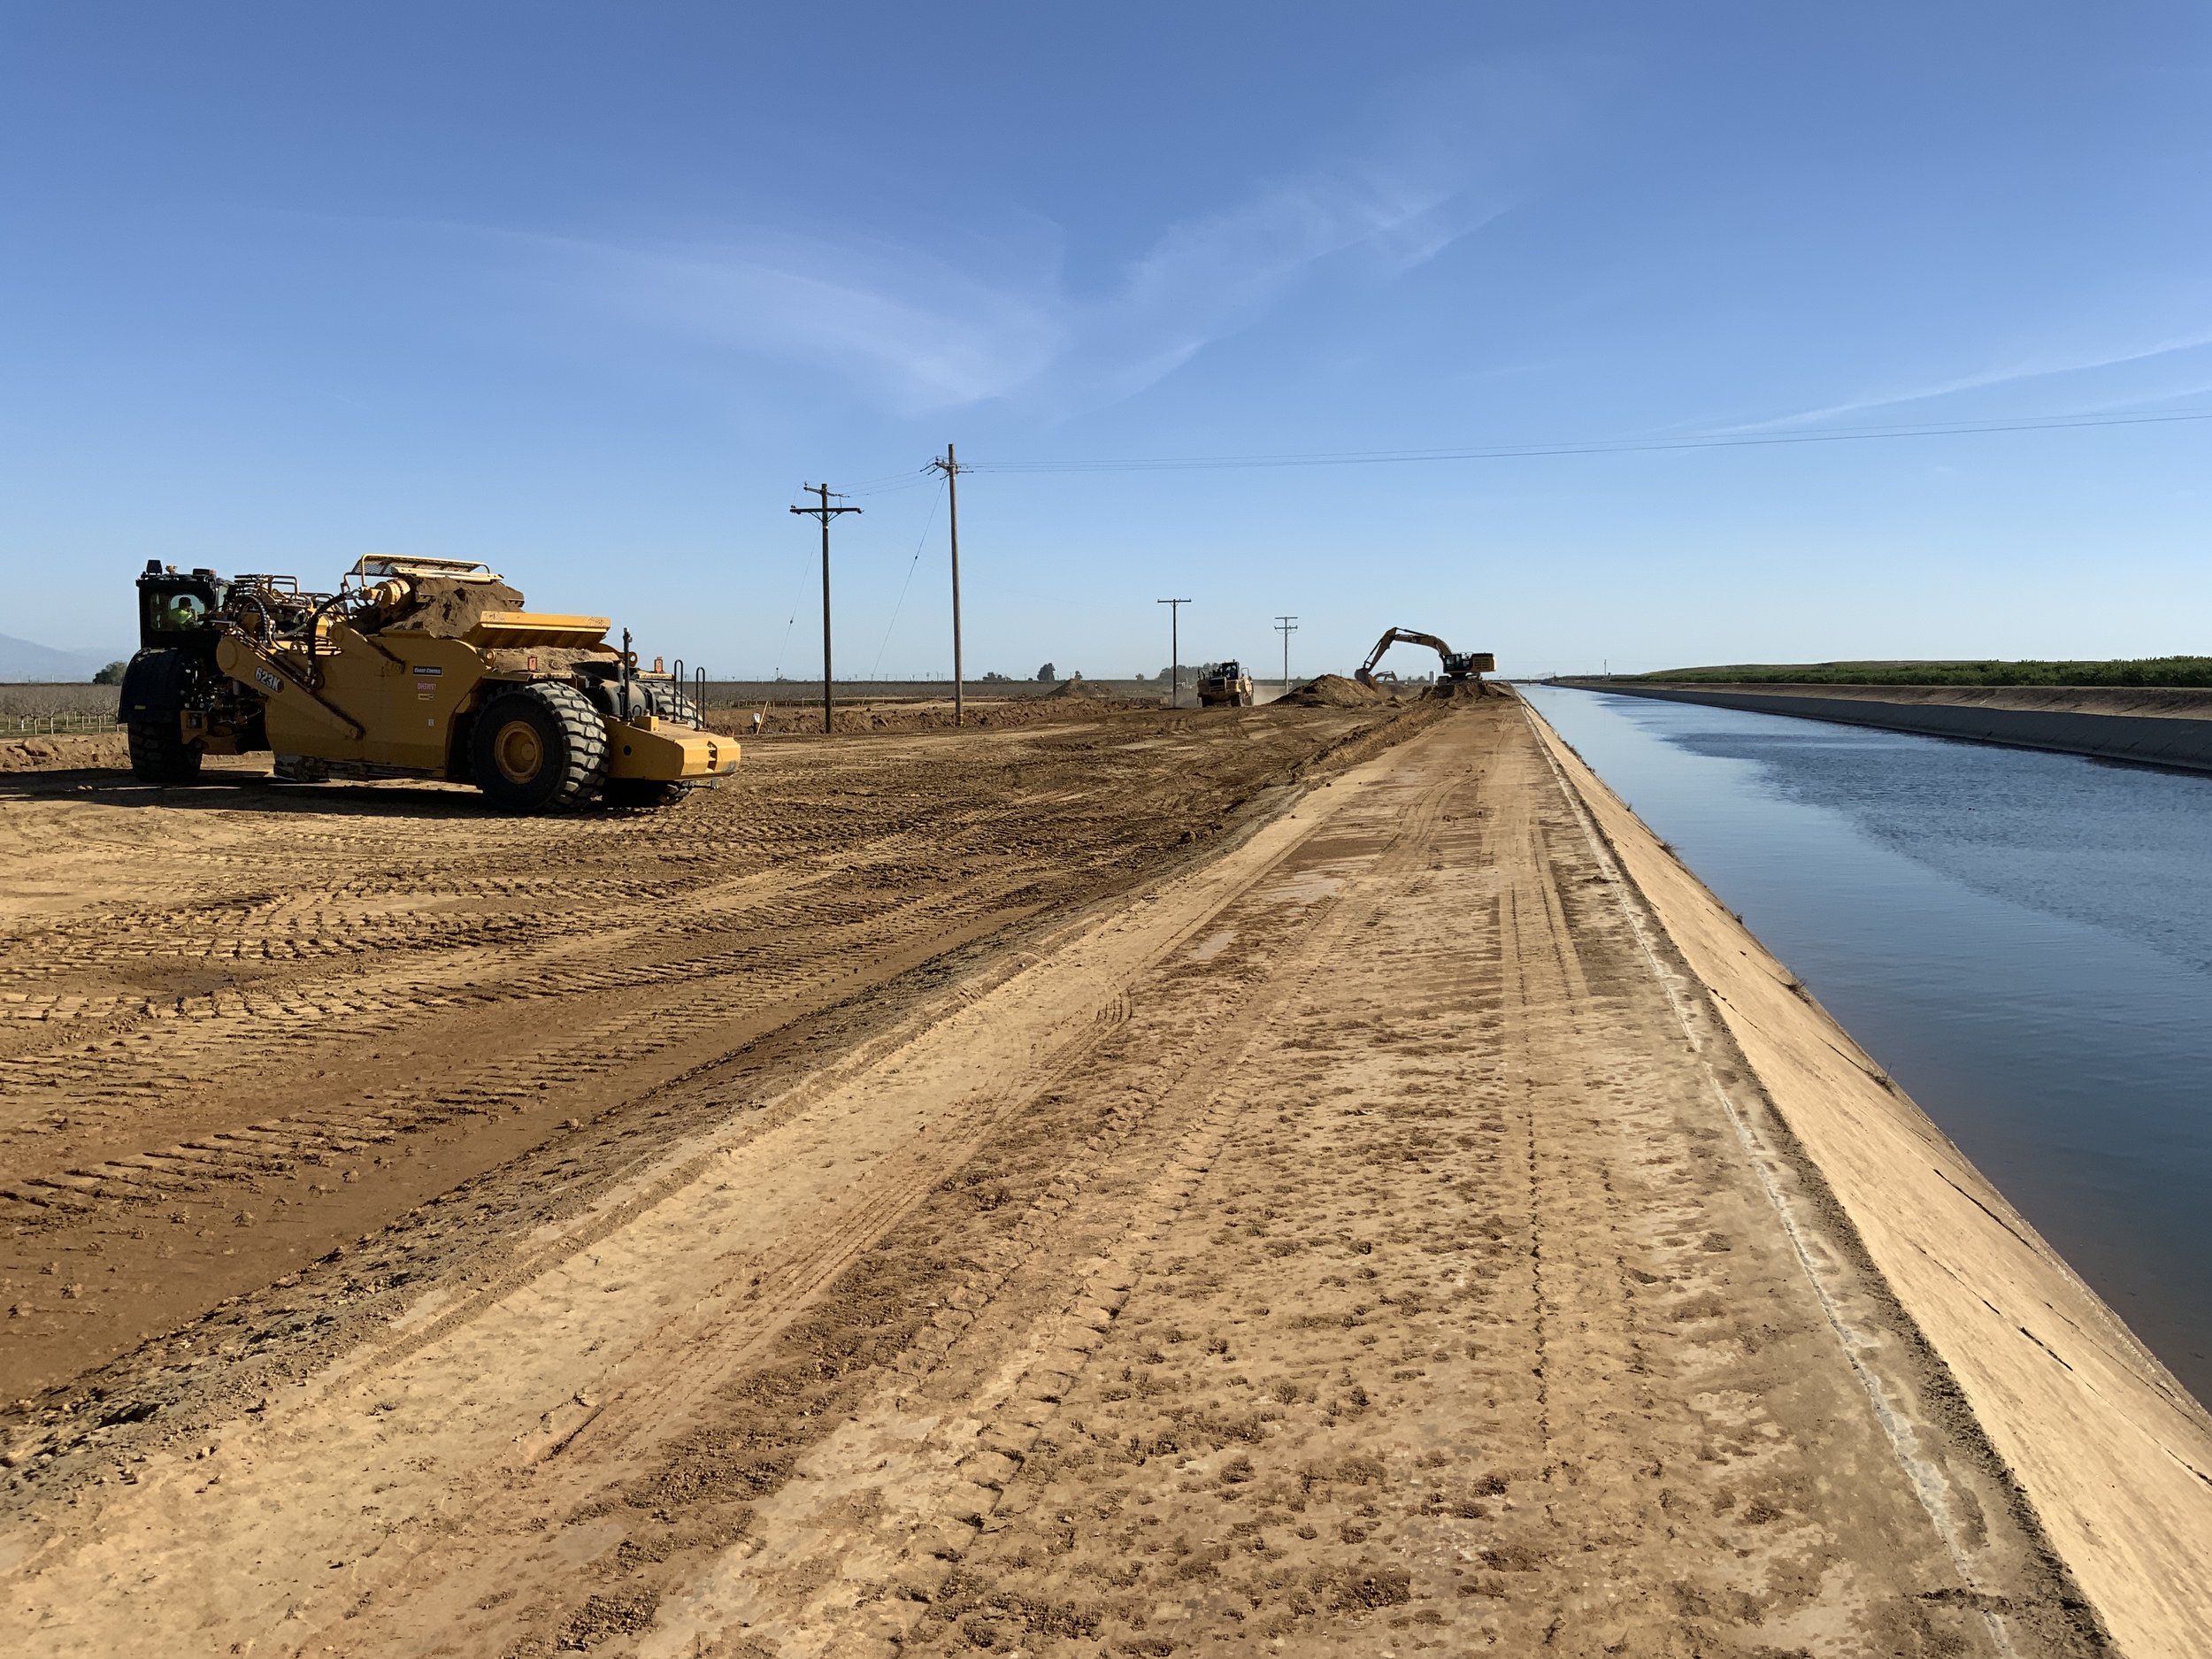   Friant-Kern Canal Middle Reach Capacity Correction Project   Restoring the Canal’s Full Design Capacity to Support a Sustainable Future   Learn More  